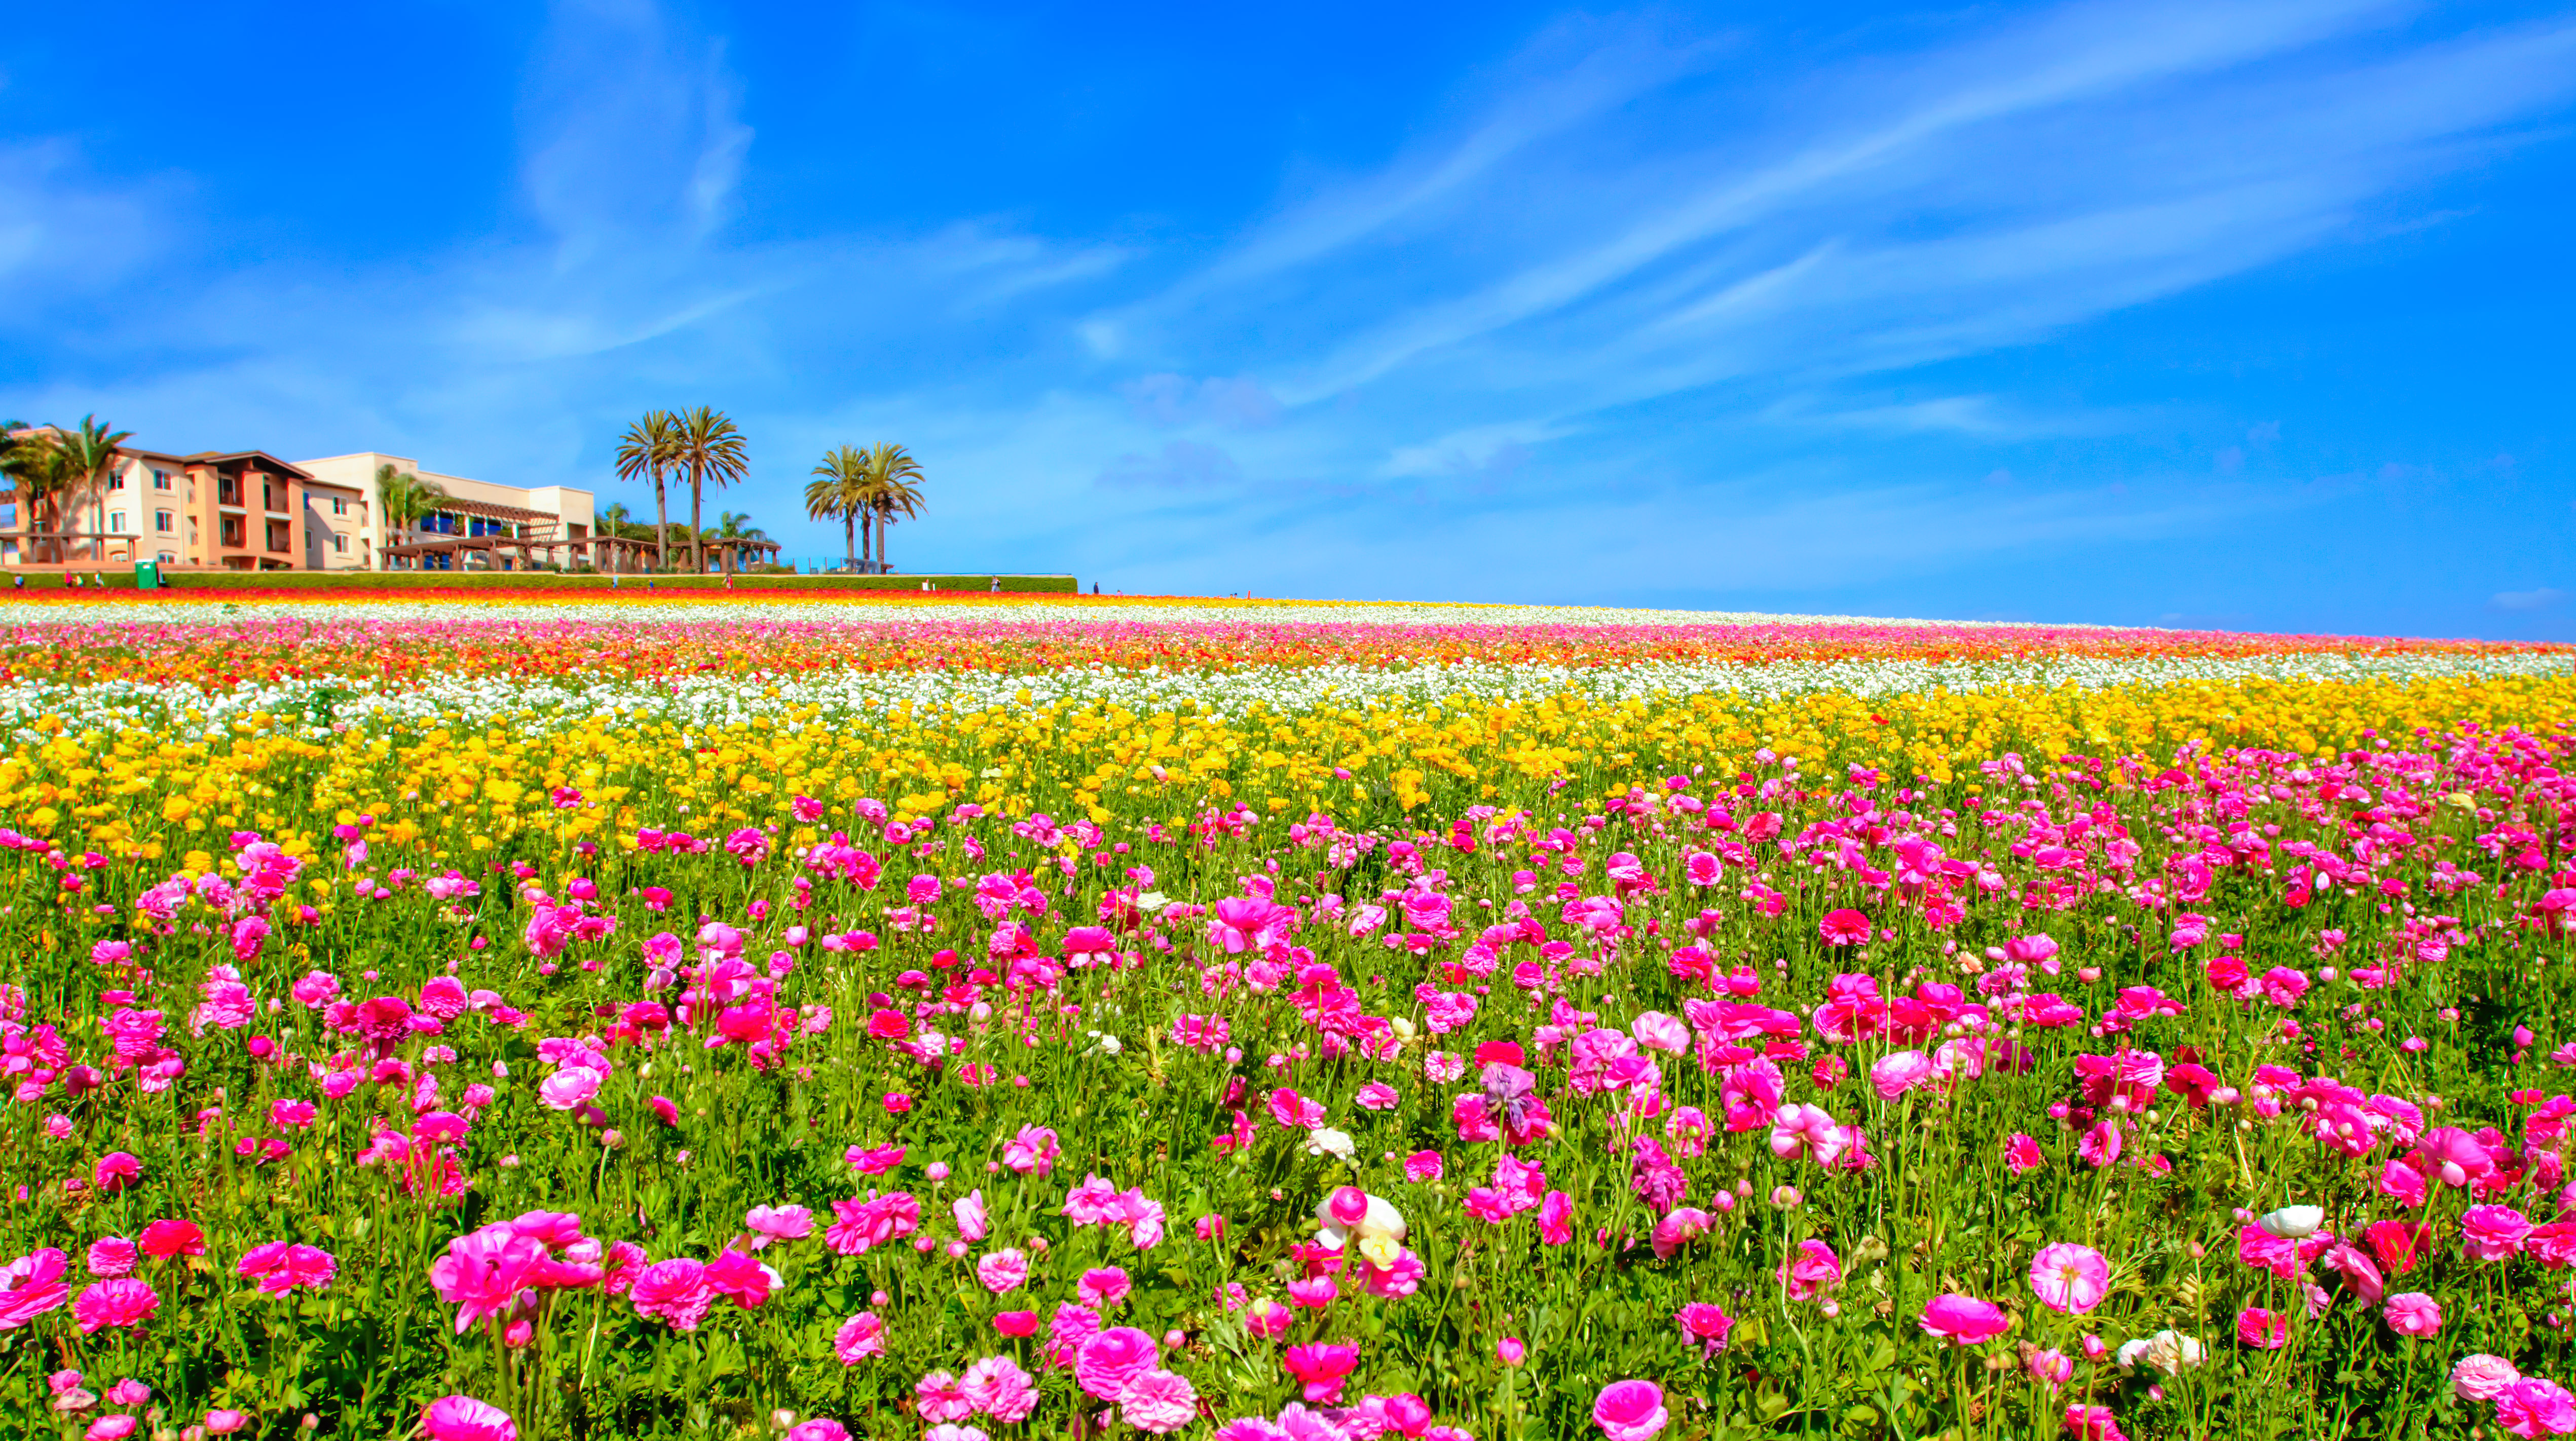 The Flower Fields at Carlsbad Ranch - San Diego Travel Blog